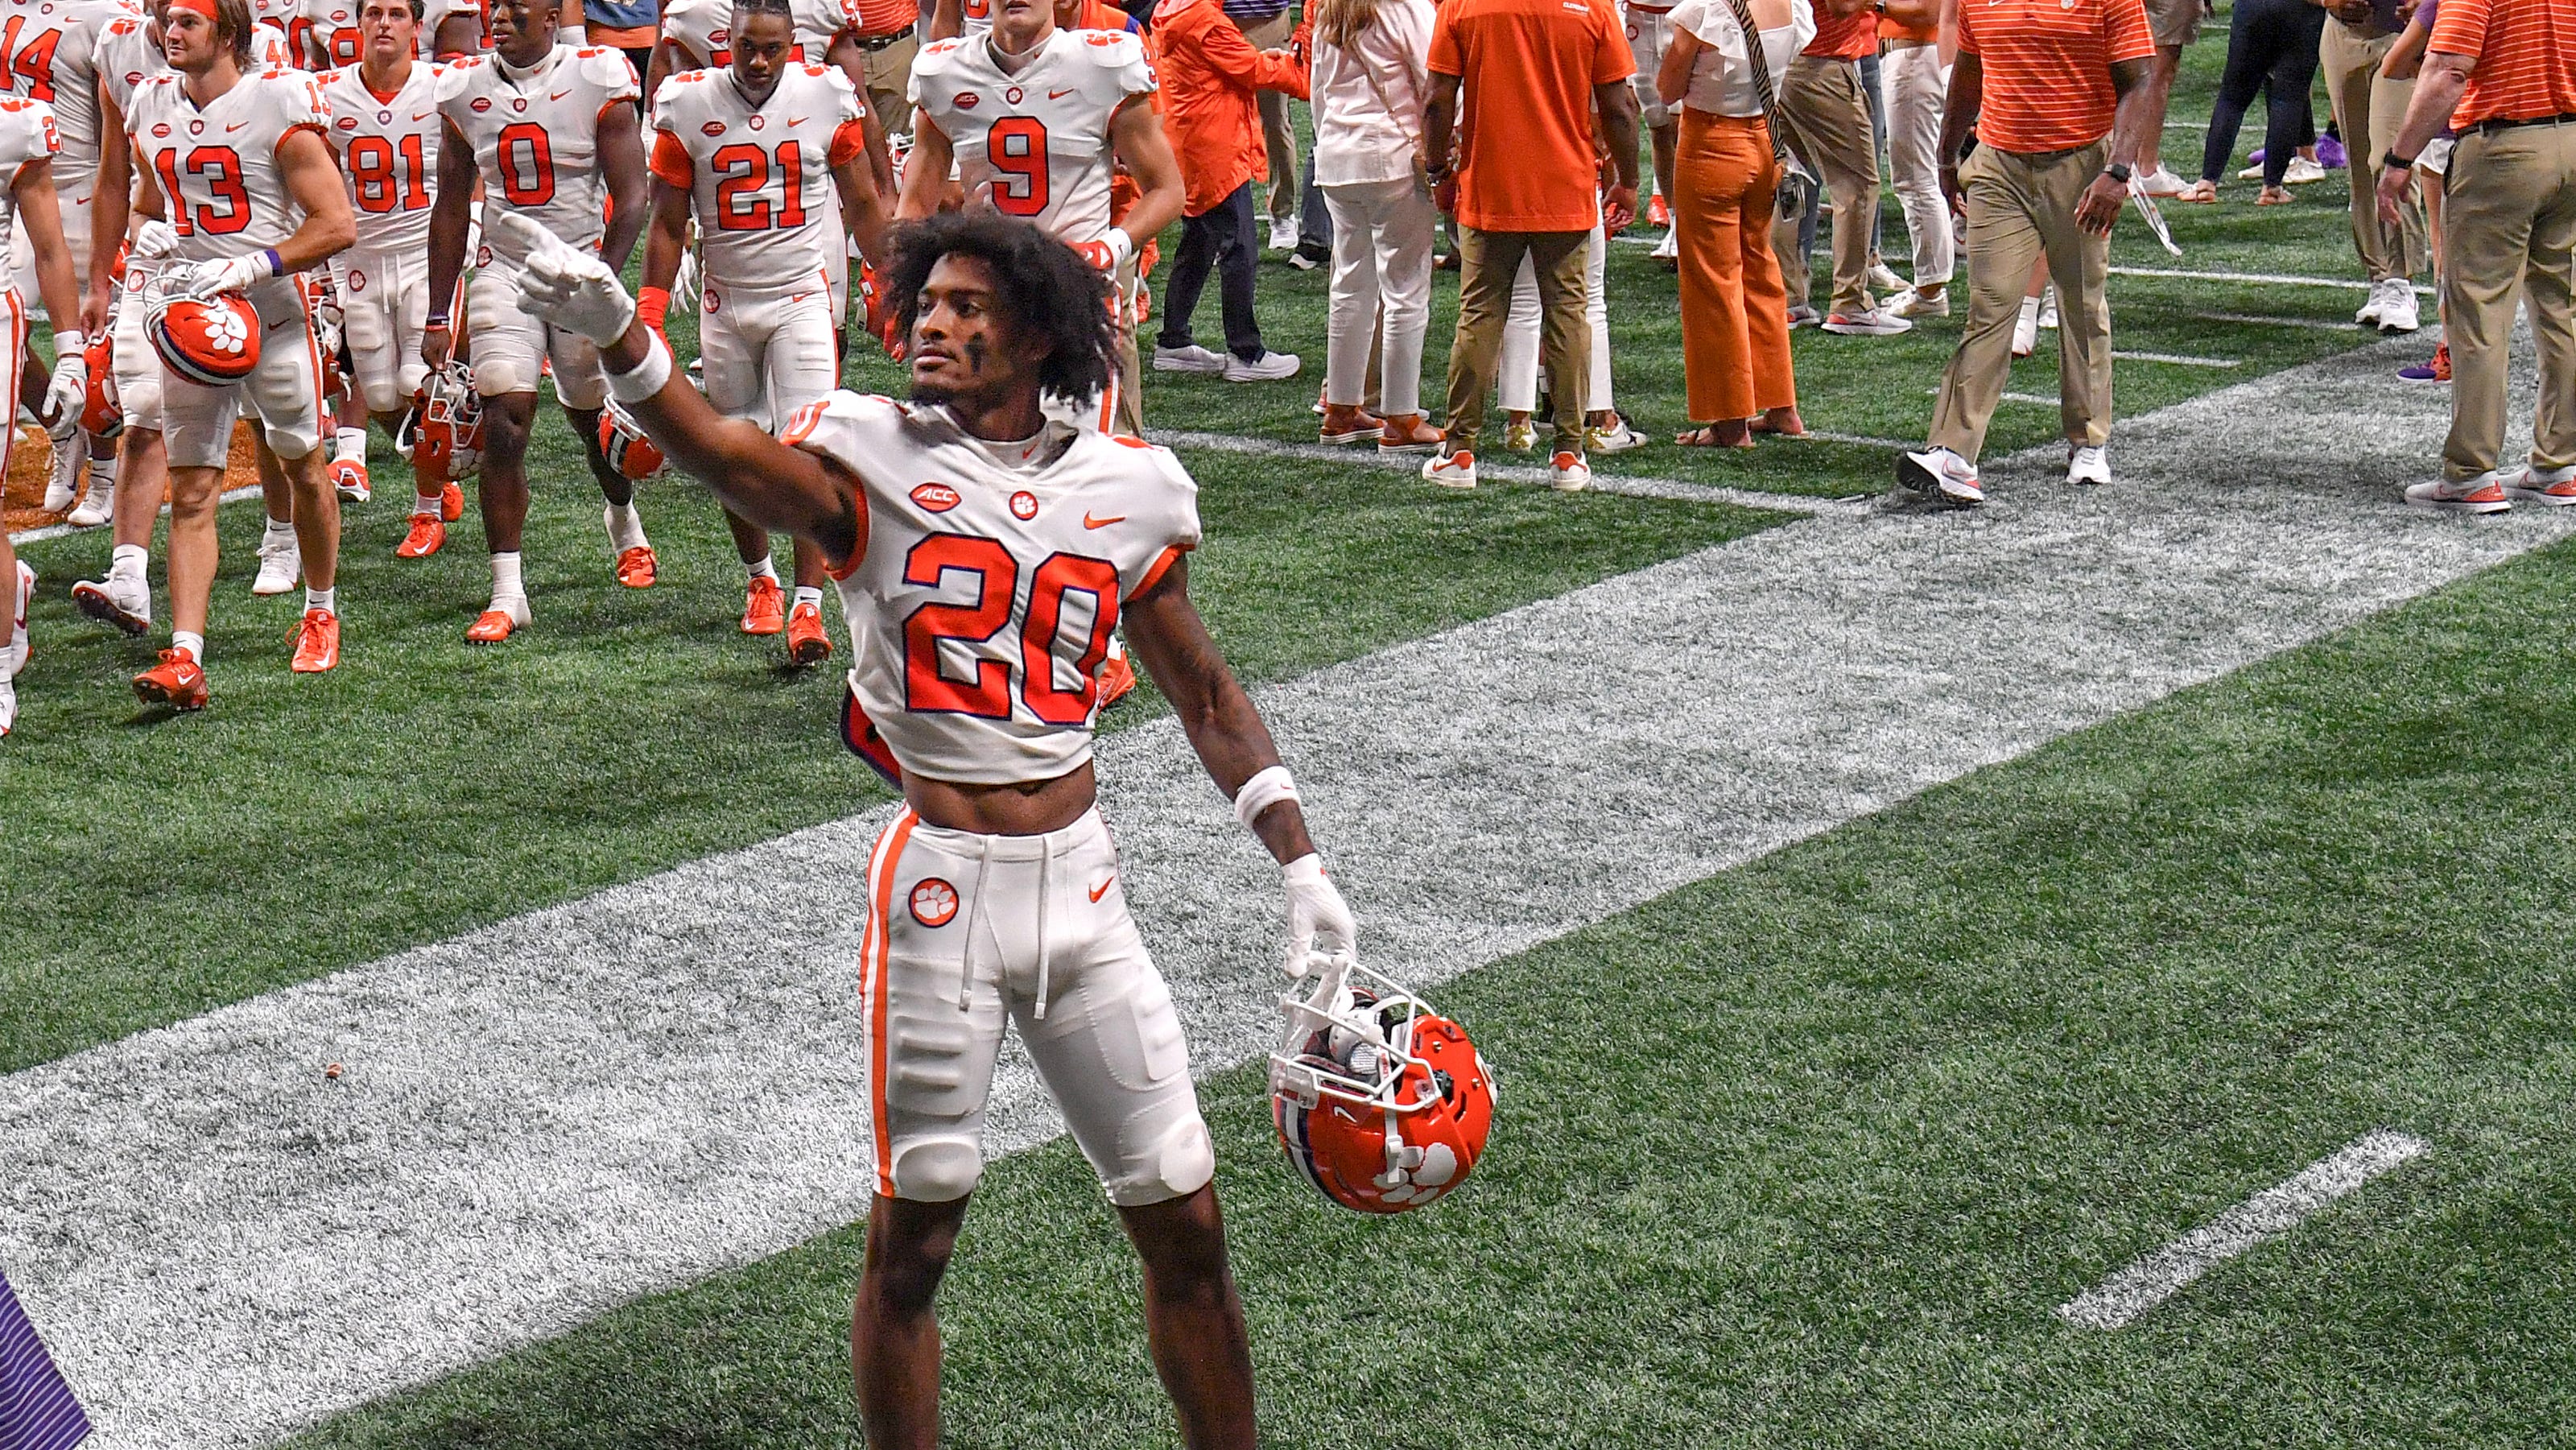 Can Clemson football trust Nate Wiggins to be more mature this season?